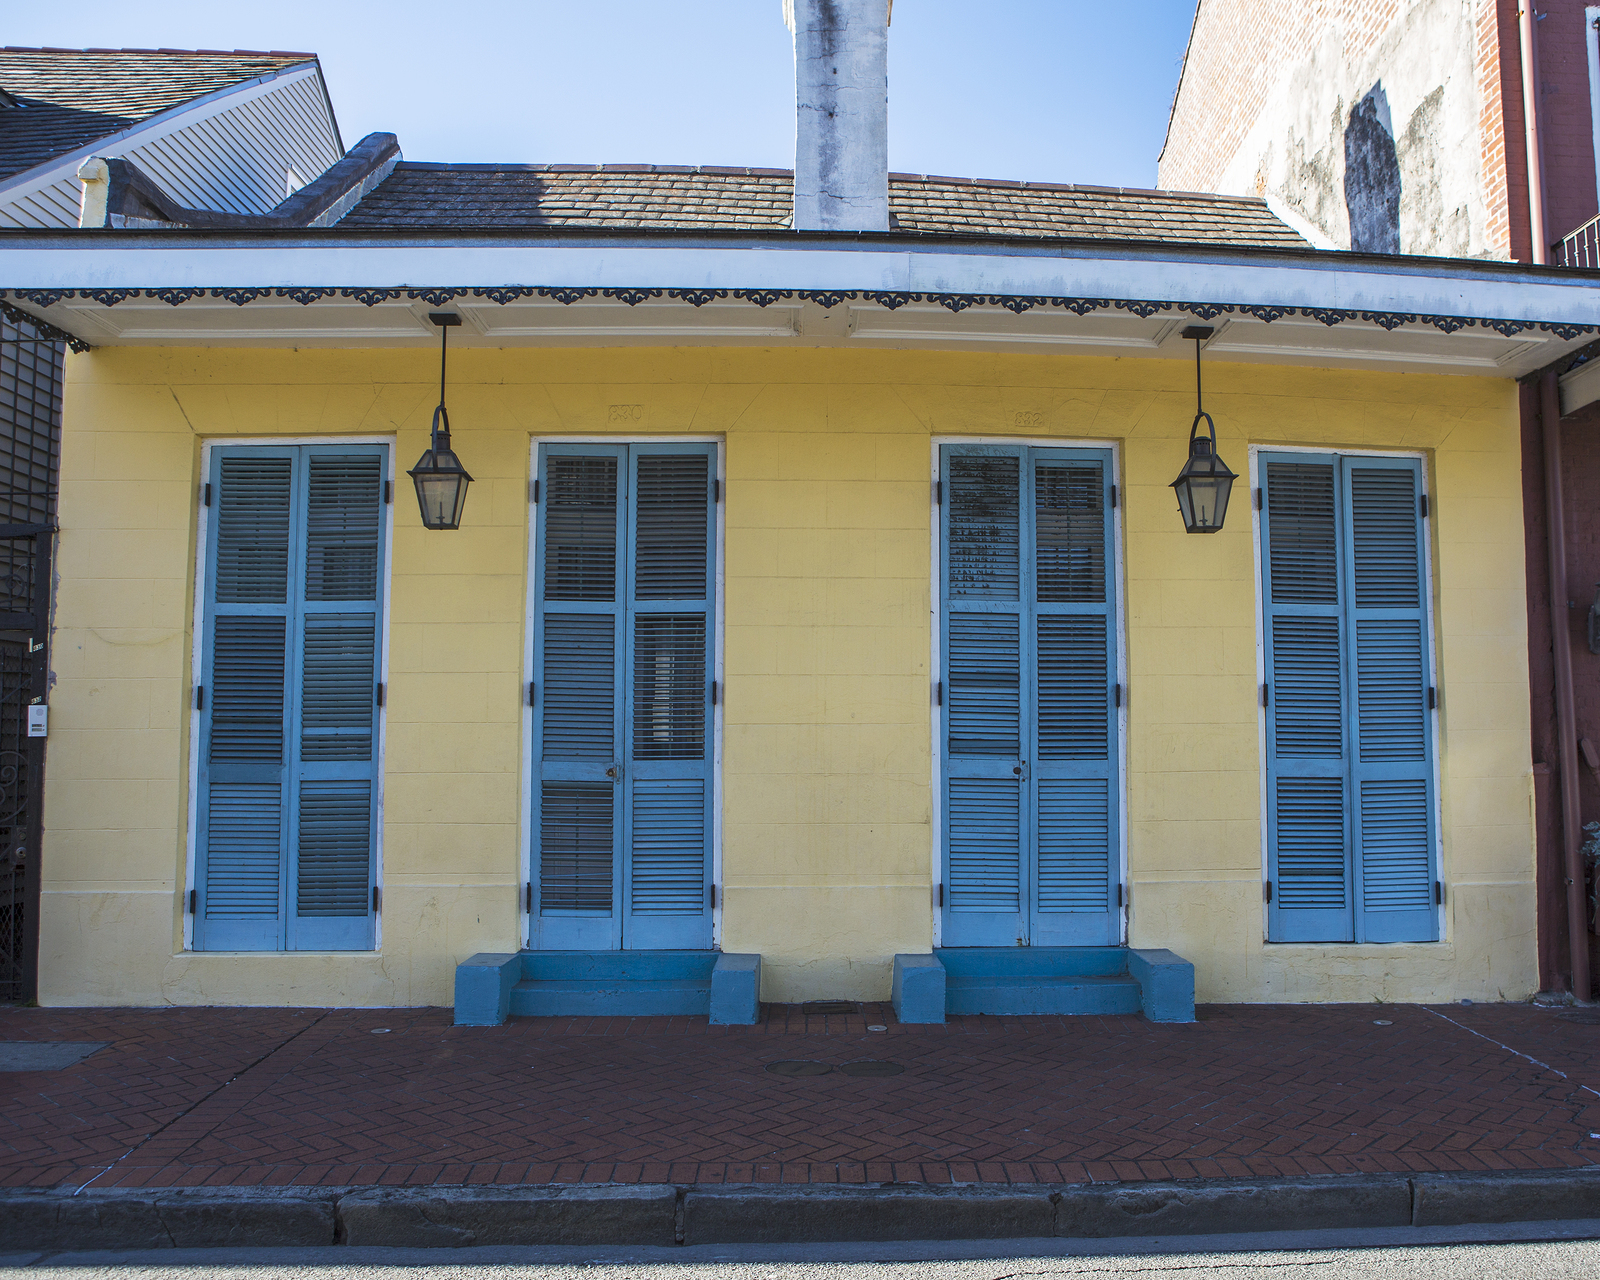 A home in the Frensch Quarter of New Orleans in Louisiana.